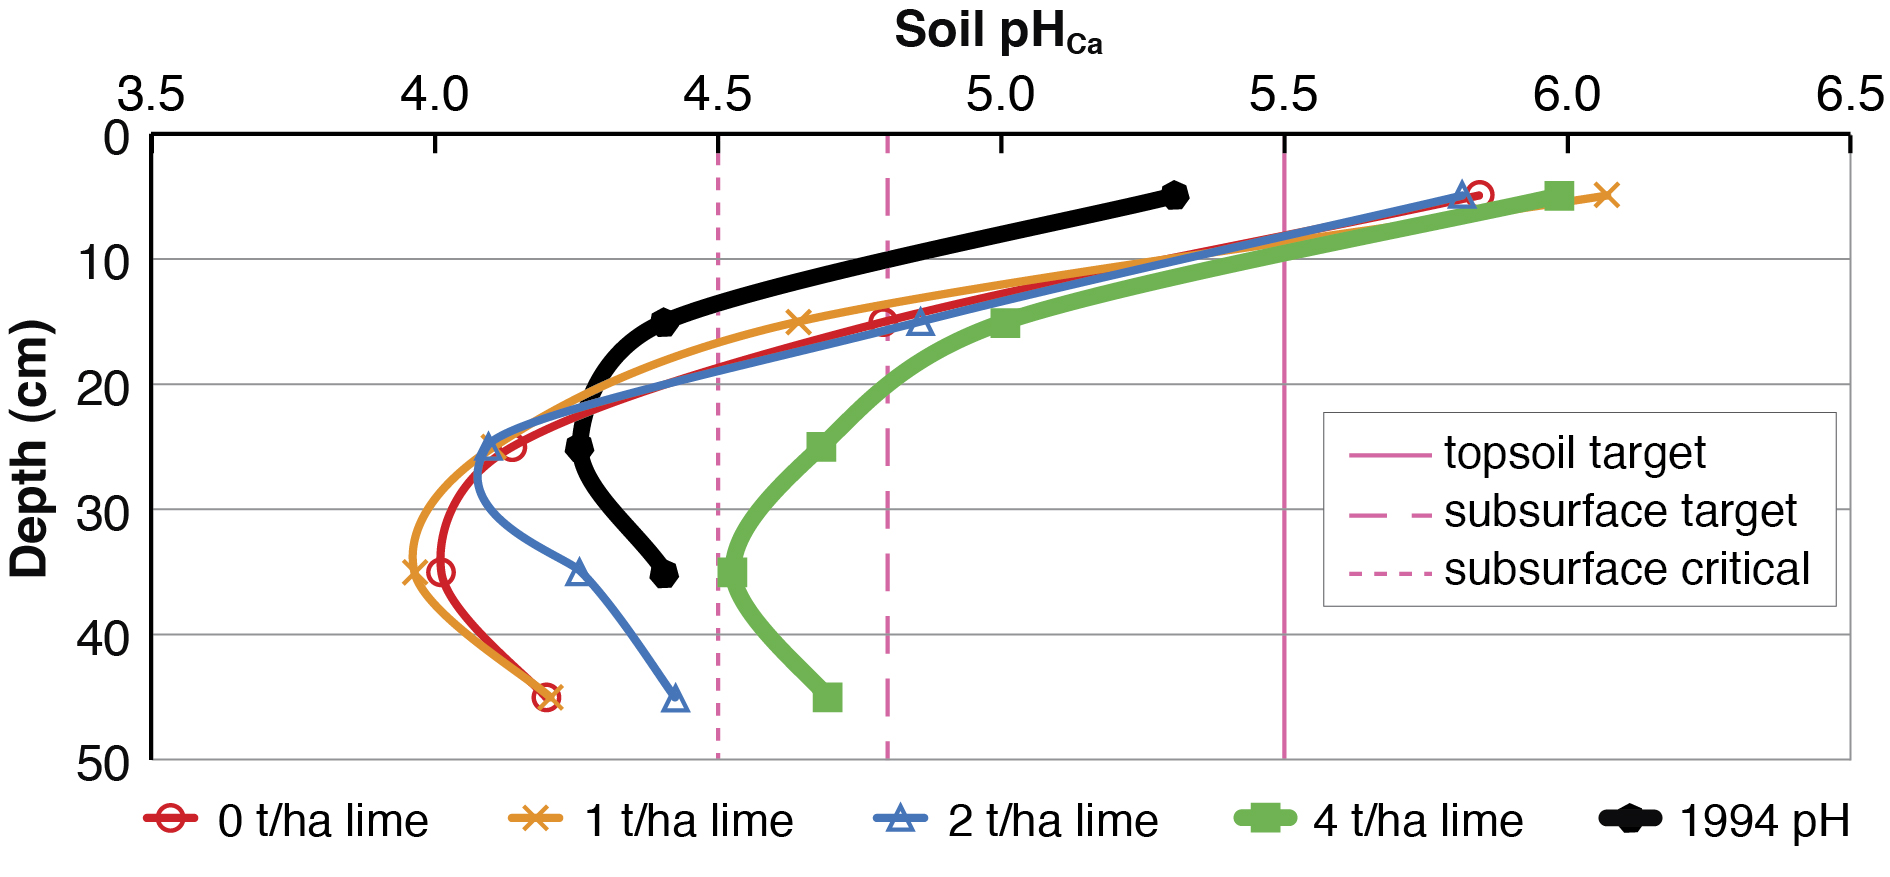 Figure 1 Soil pH profiles in 2013 for different lime treatments compared to the starting pH 20 years ago in a trial near Mingenew, WA.